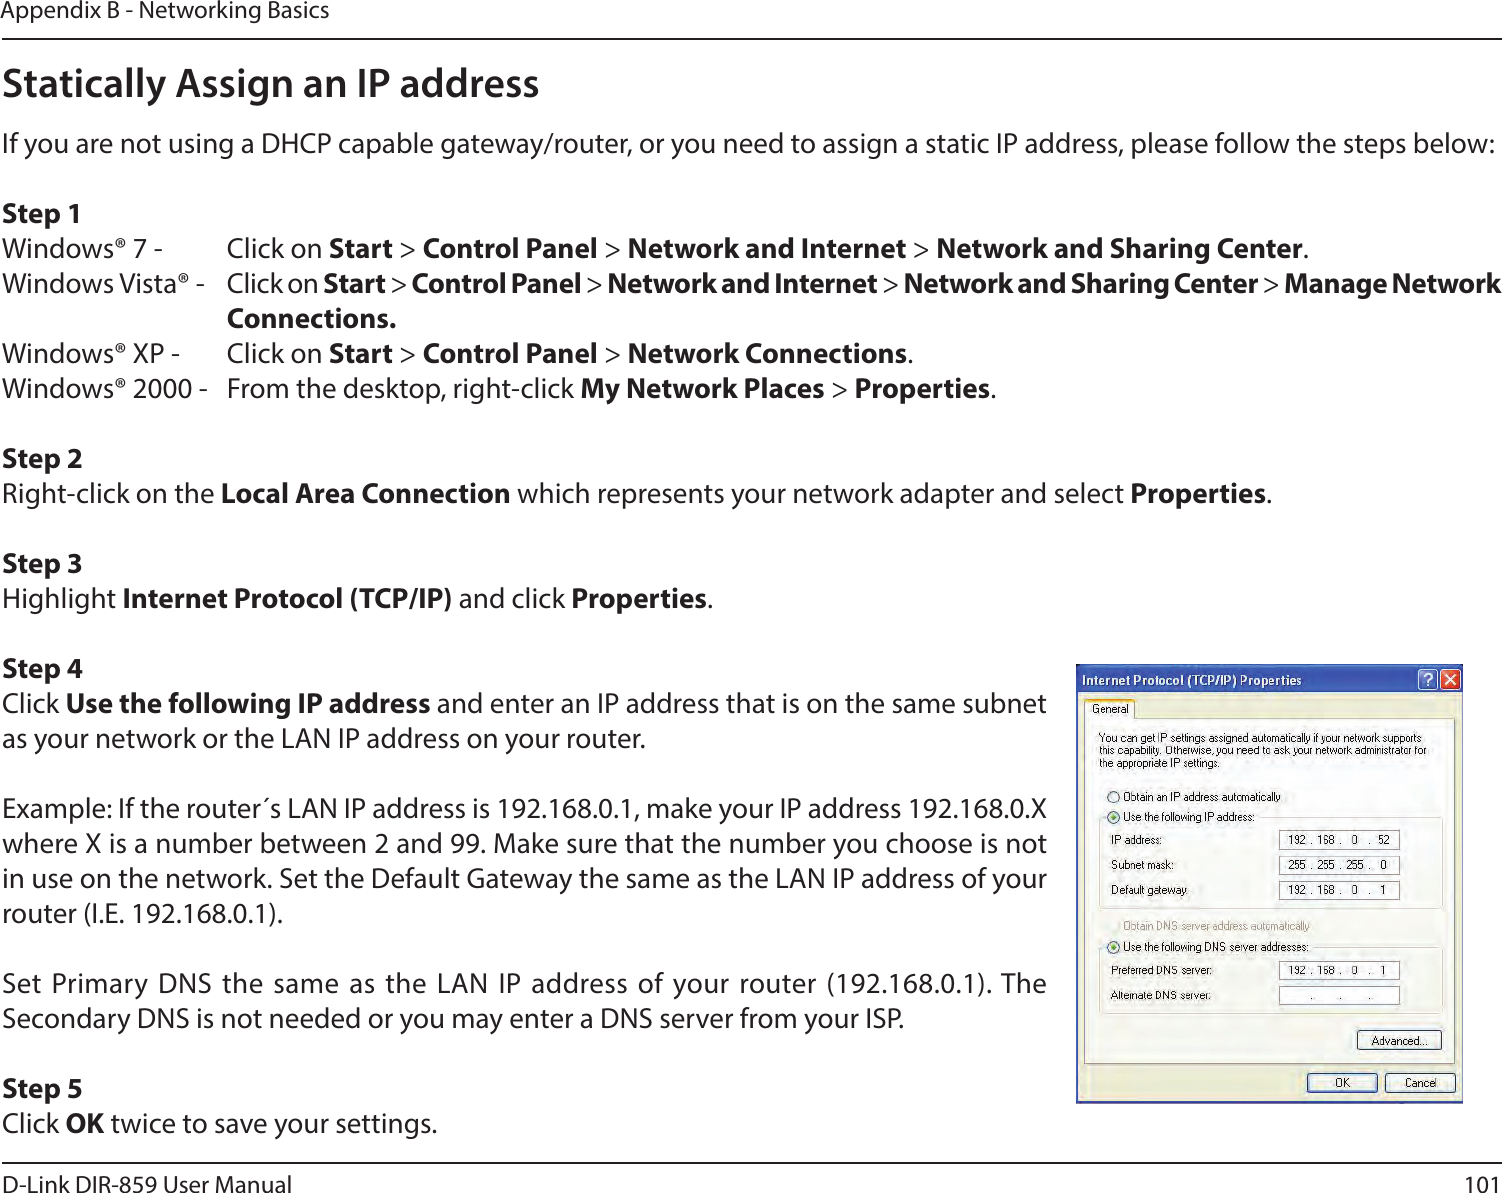 101D-Link DIR-859 User ManualAppendix B - Networking BasicsStatically Assign an IP addressIf you are not using a DHCP capable gateway/router, or you need to assign a static IP address, please follow the steps below:Step 1Windows® 7 -  Click on Start &gt; Control Panel &gt; Network and Internet &gt; Network and Sharing Center.Windows Vista® -  Click on Start &gt; Control Panel &gt; Network and Internet &gt; Network and Sharing Center &gt; Manage Network    Connections.Windows® XP -  Click on Start &gt; Control Panel &gt; Network Connections.Windows® 2000 -  From the desktop, right-click My Network Places &gt; Properties.Step 2Right-click on the Local Area Connection which represents your network adapter and select Properties.Step 3Highlight Internet Protocol (TCP/IP) and click Properties.Step 4Click Use the following IP address and enter an IP address that is on the same subnet as your network or the LAN IP address on your router. Example: If the router´s LAN IP address is 192.168.0.1, make your IP address 192.168.0.X where X is a number between 2 and 99. Make sure that the number you choose is not in use on the network. Set the Default Gateway the same as the LAN IP address of your router (I.E. 192.168.0.1). Set Primary DNS the same as the LAN IP address of your router (192.168.0.1). The Secondary DNS is not needed or you may enter a DNS server from your ISP.Step 5Click OK twice to save your settings.